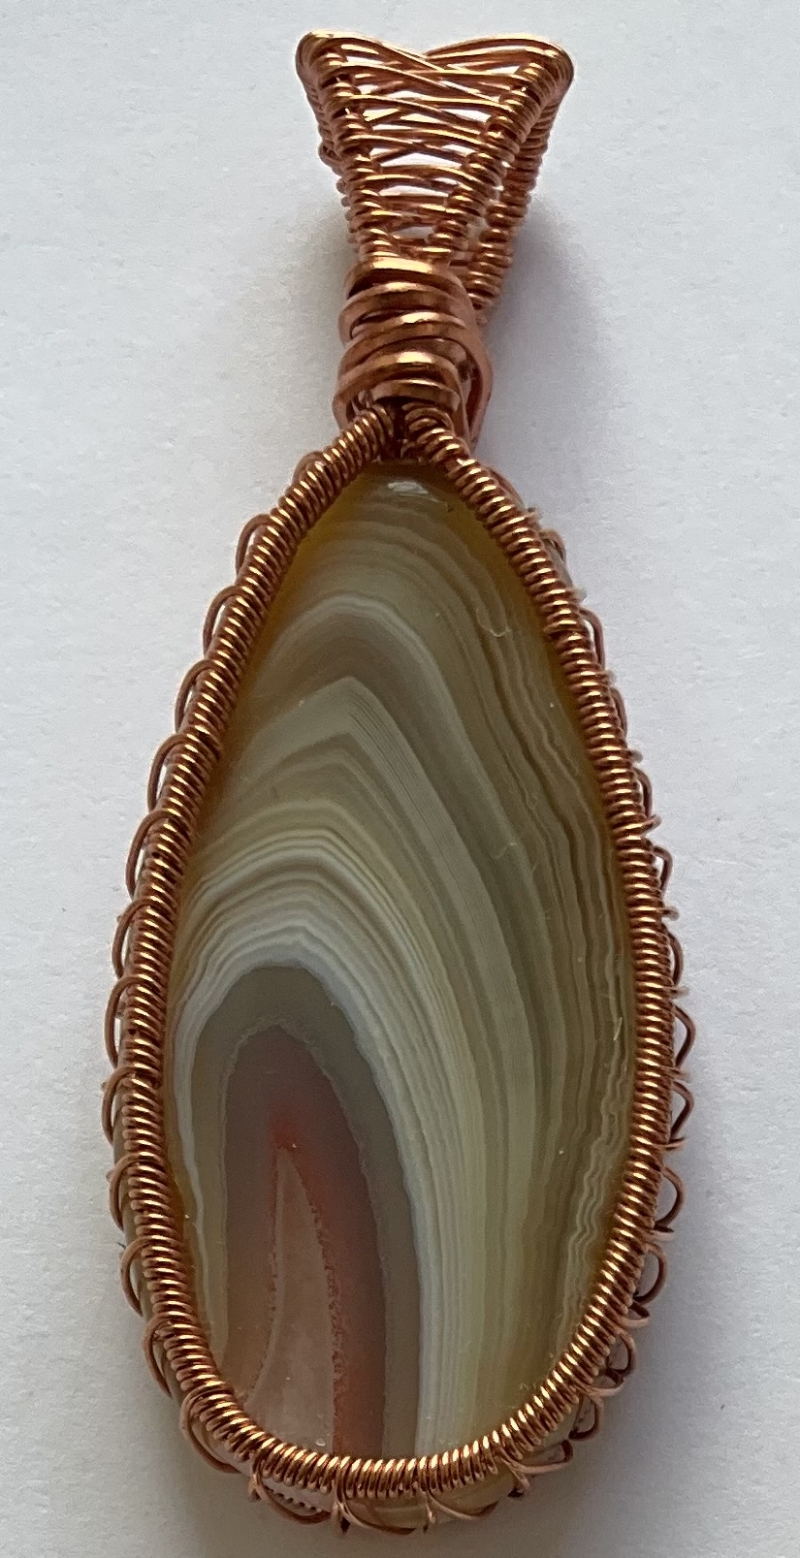 Agate Pendant with Shiny Copper Weaving